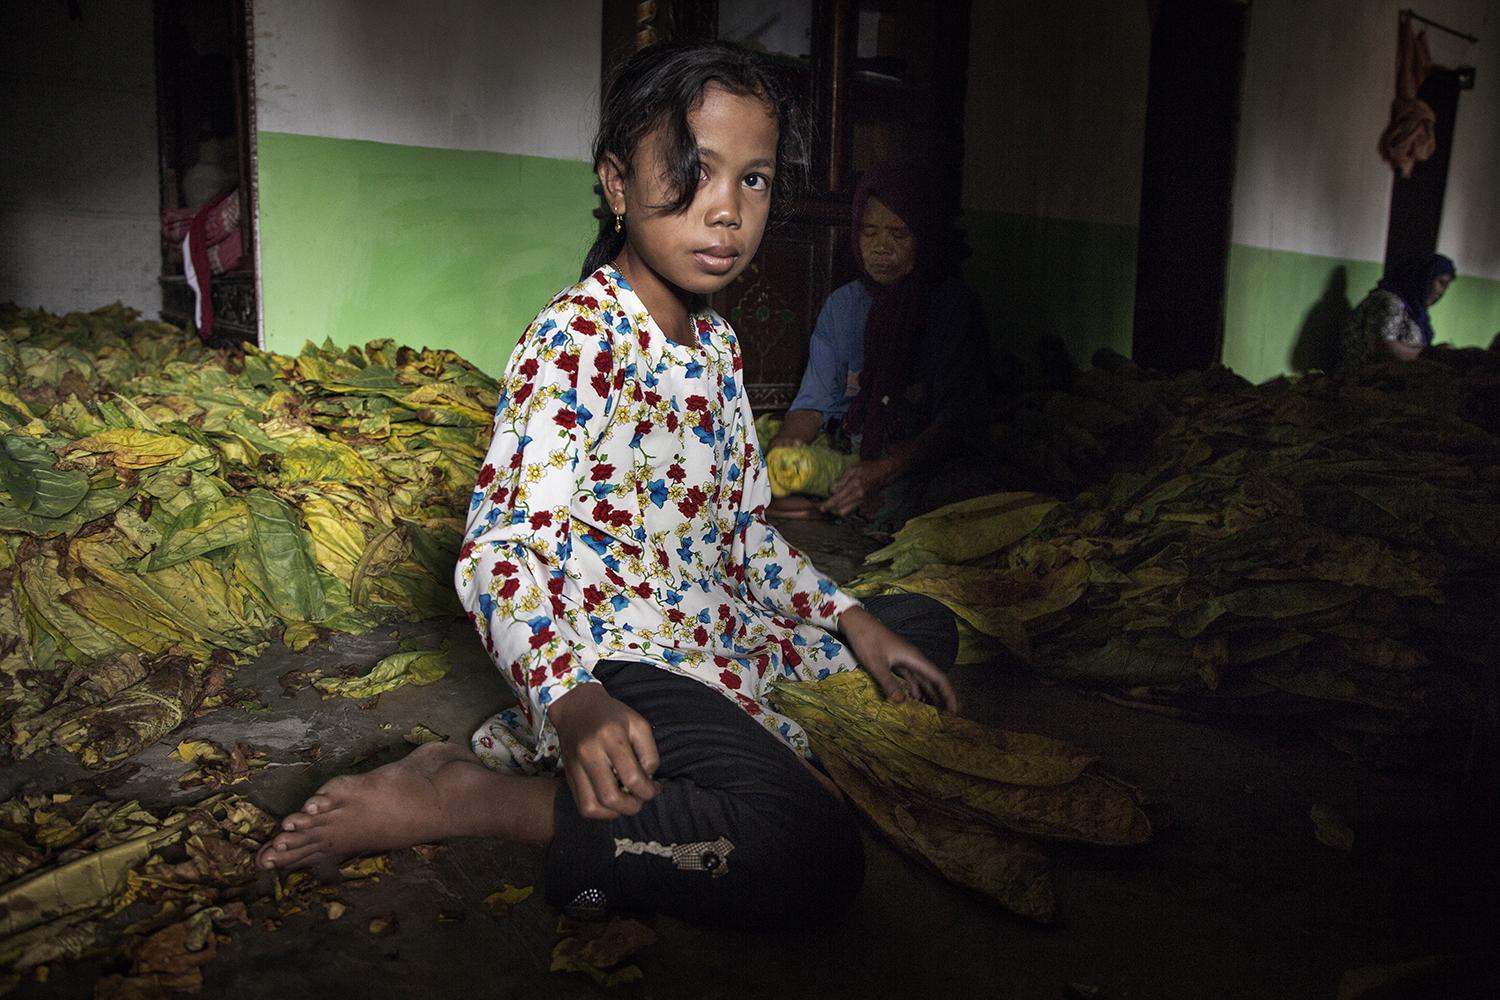 An 8-year-old girl sorts and bundles tobacco leaves by hand near Sampang, East Java.